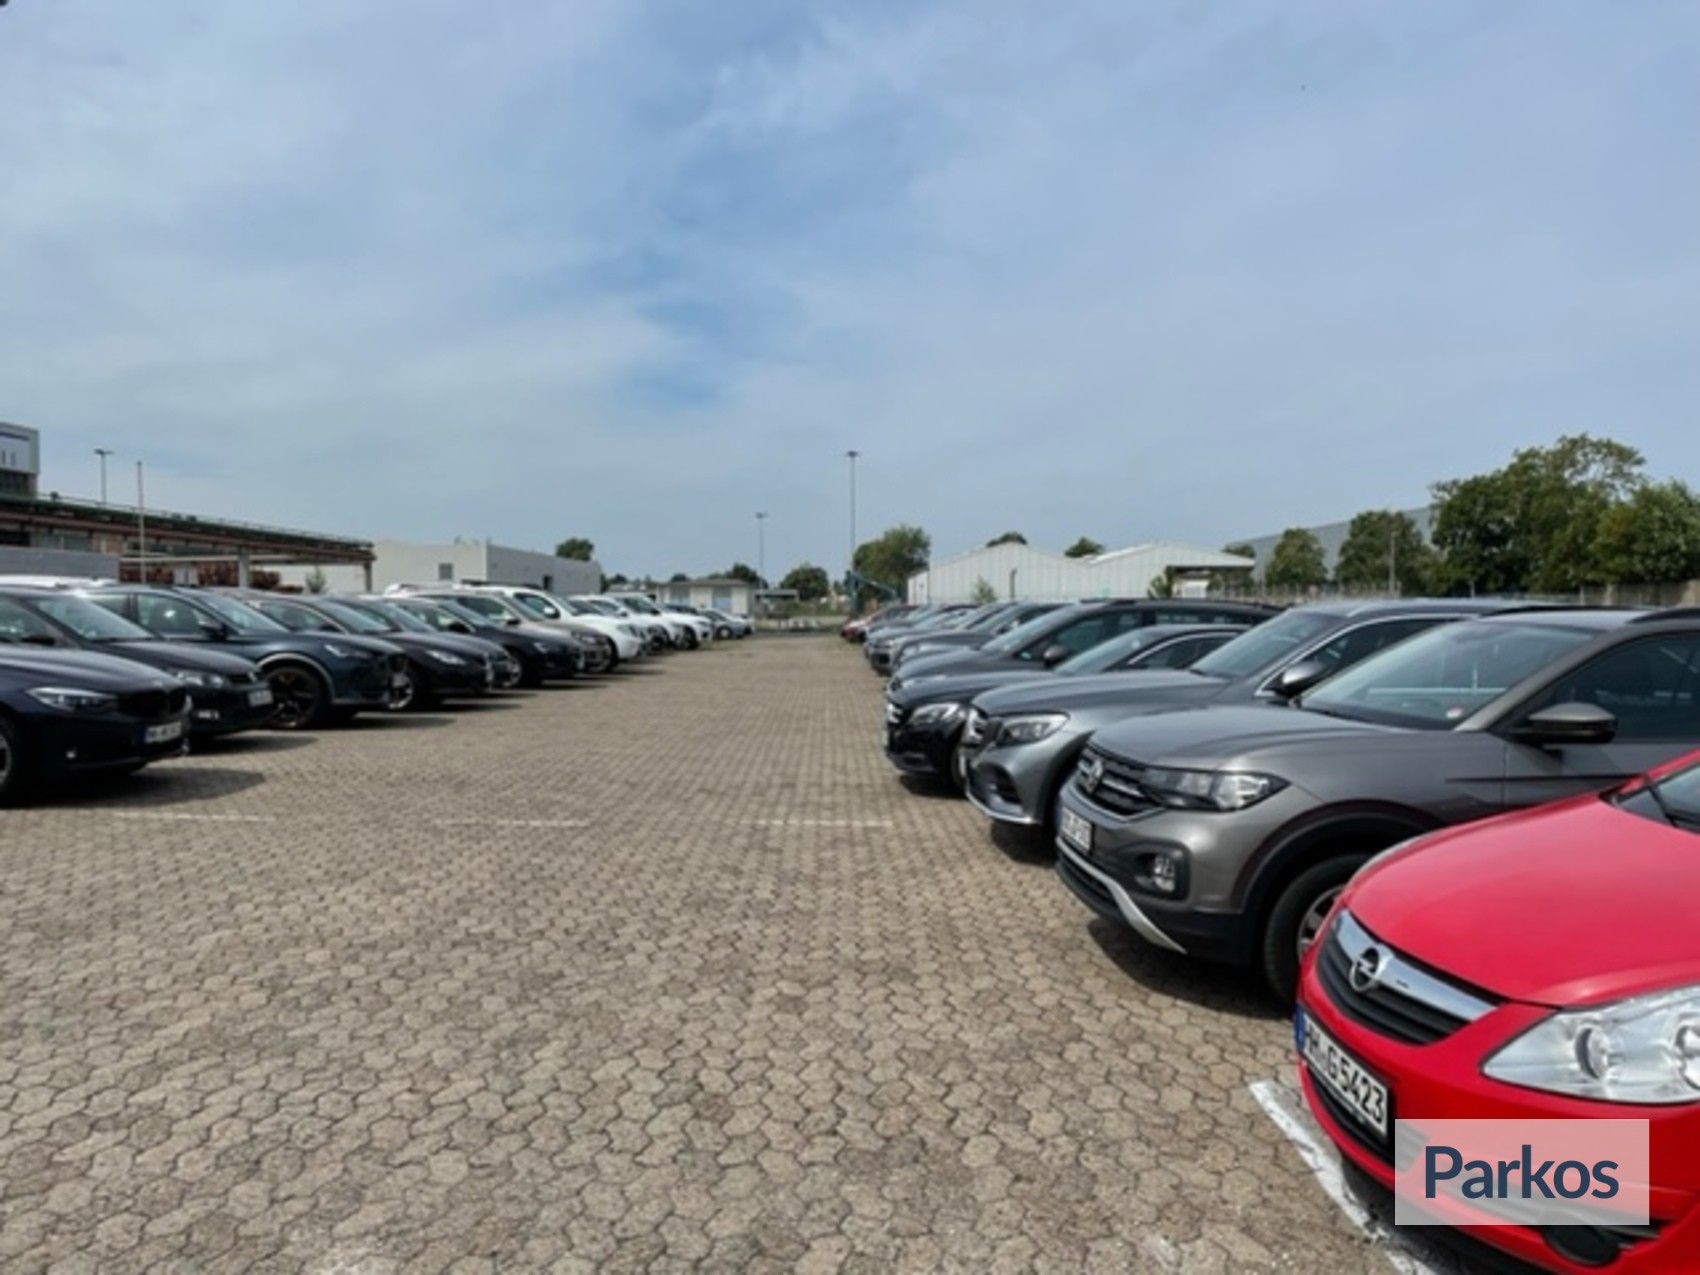 Parking spots Hannover Airport provider packages - parking fees